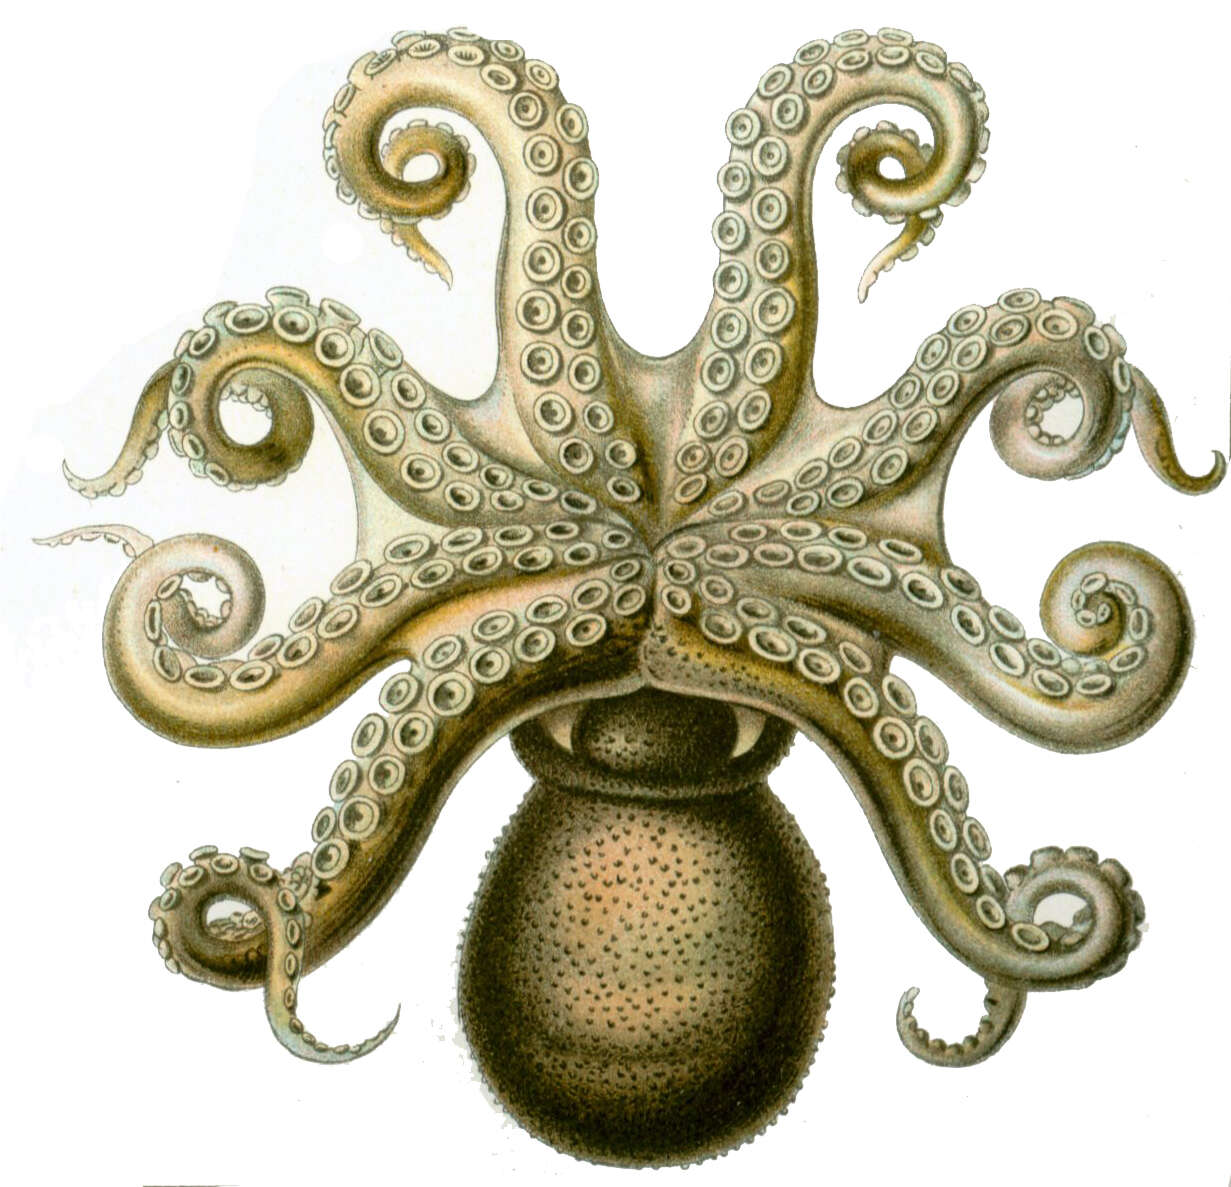 Image of Common octopus